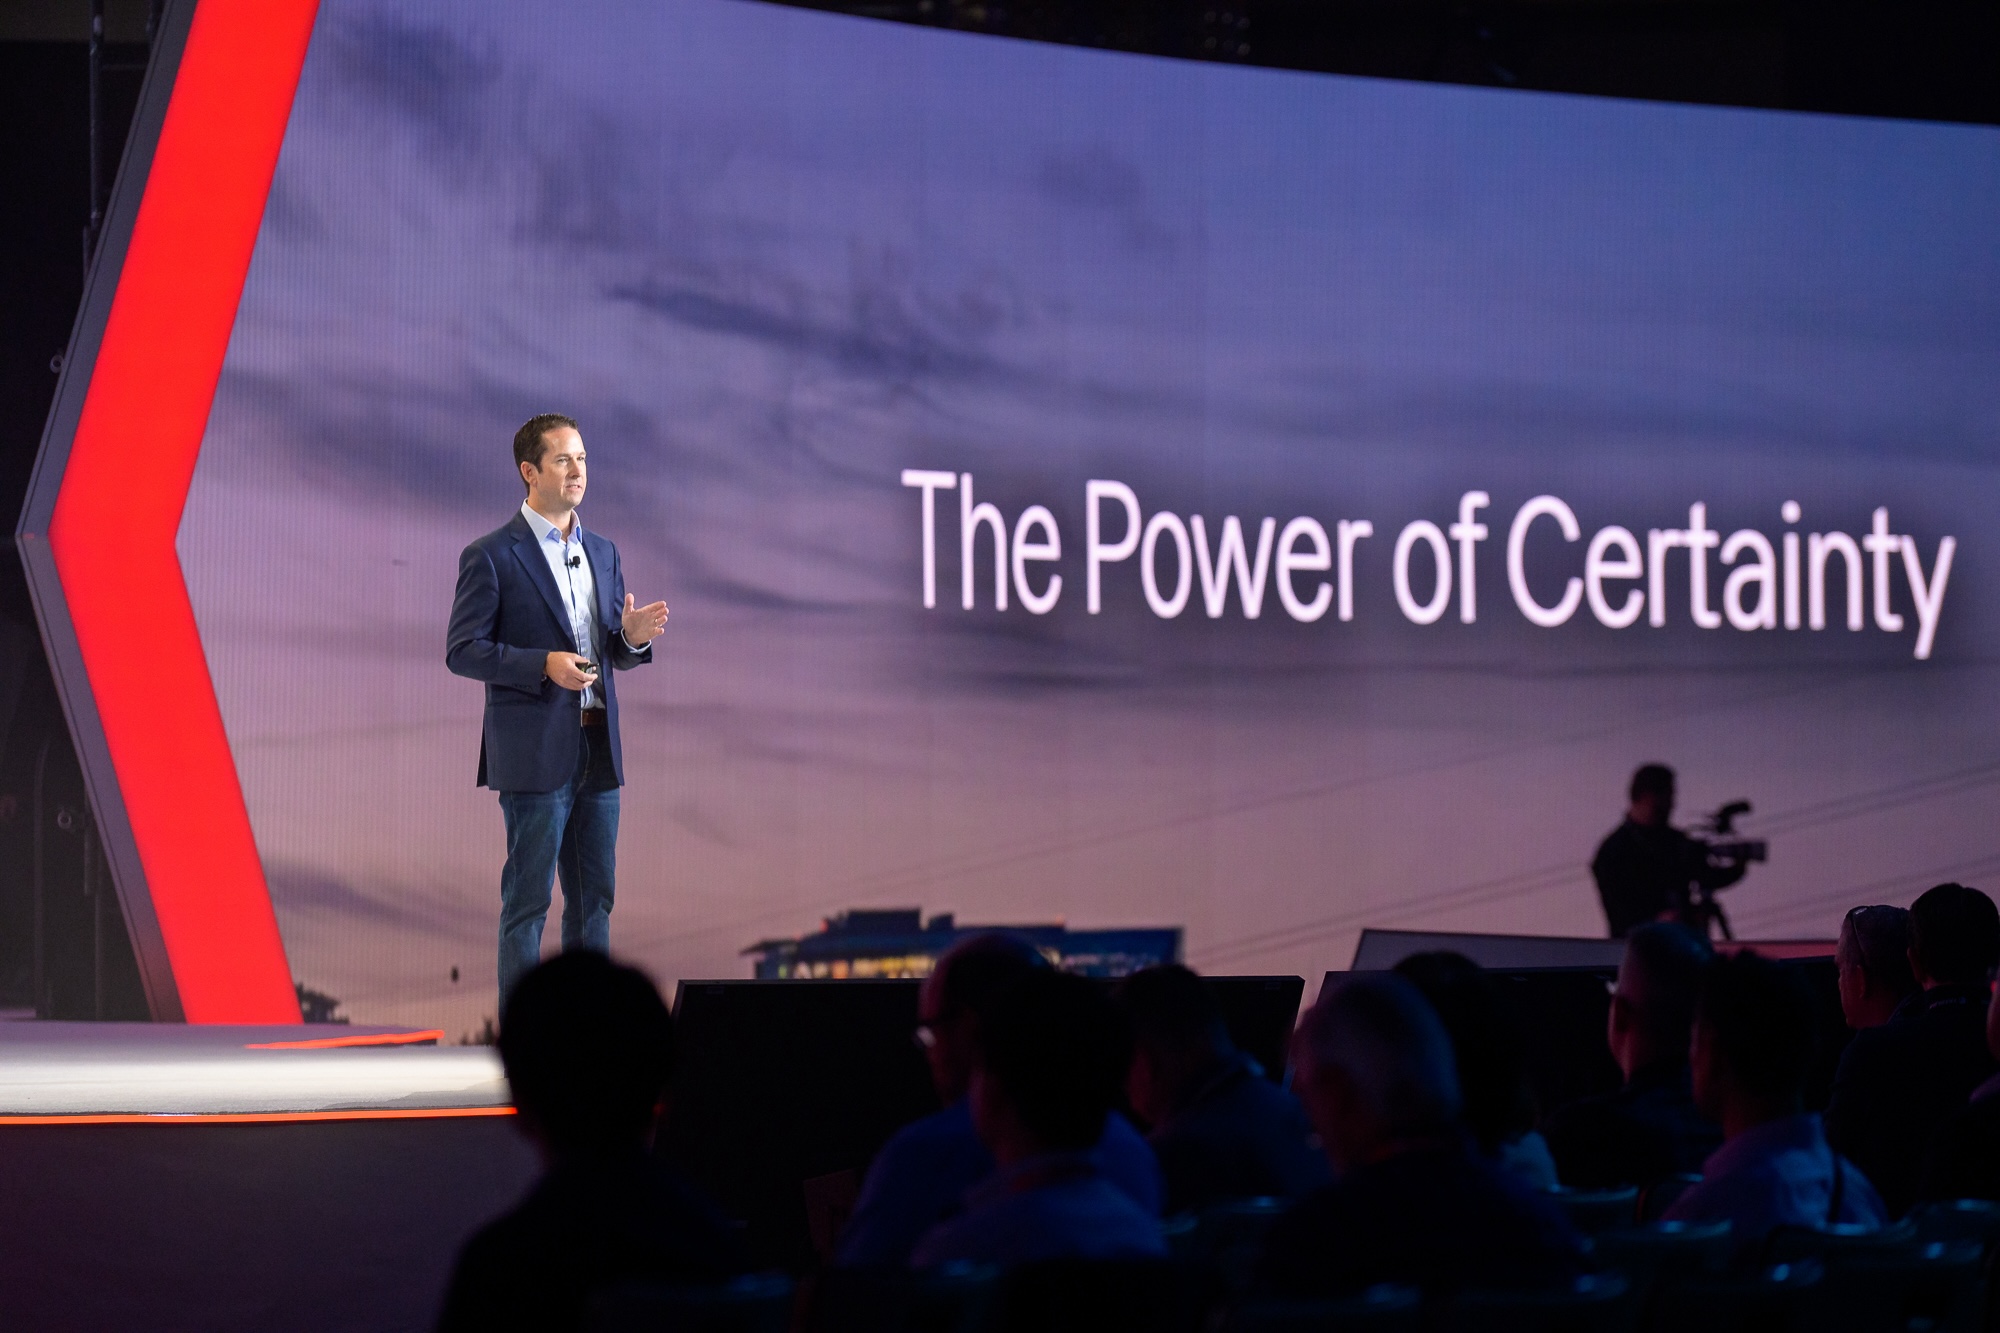 Charles Ross speaking at Tanium Converge about the power of certainty